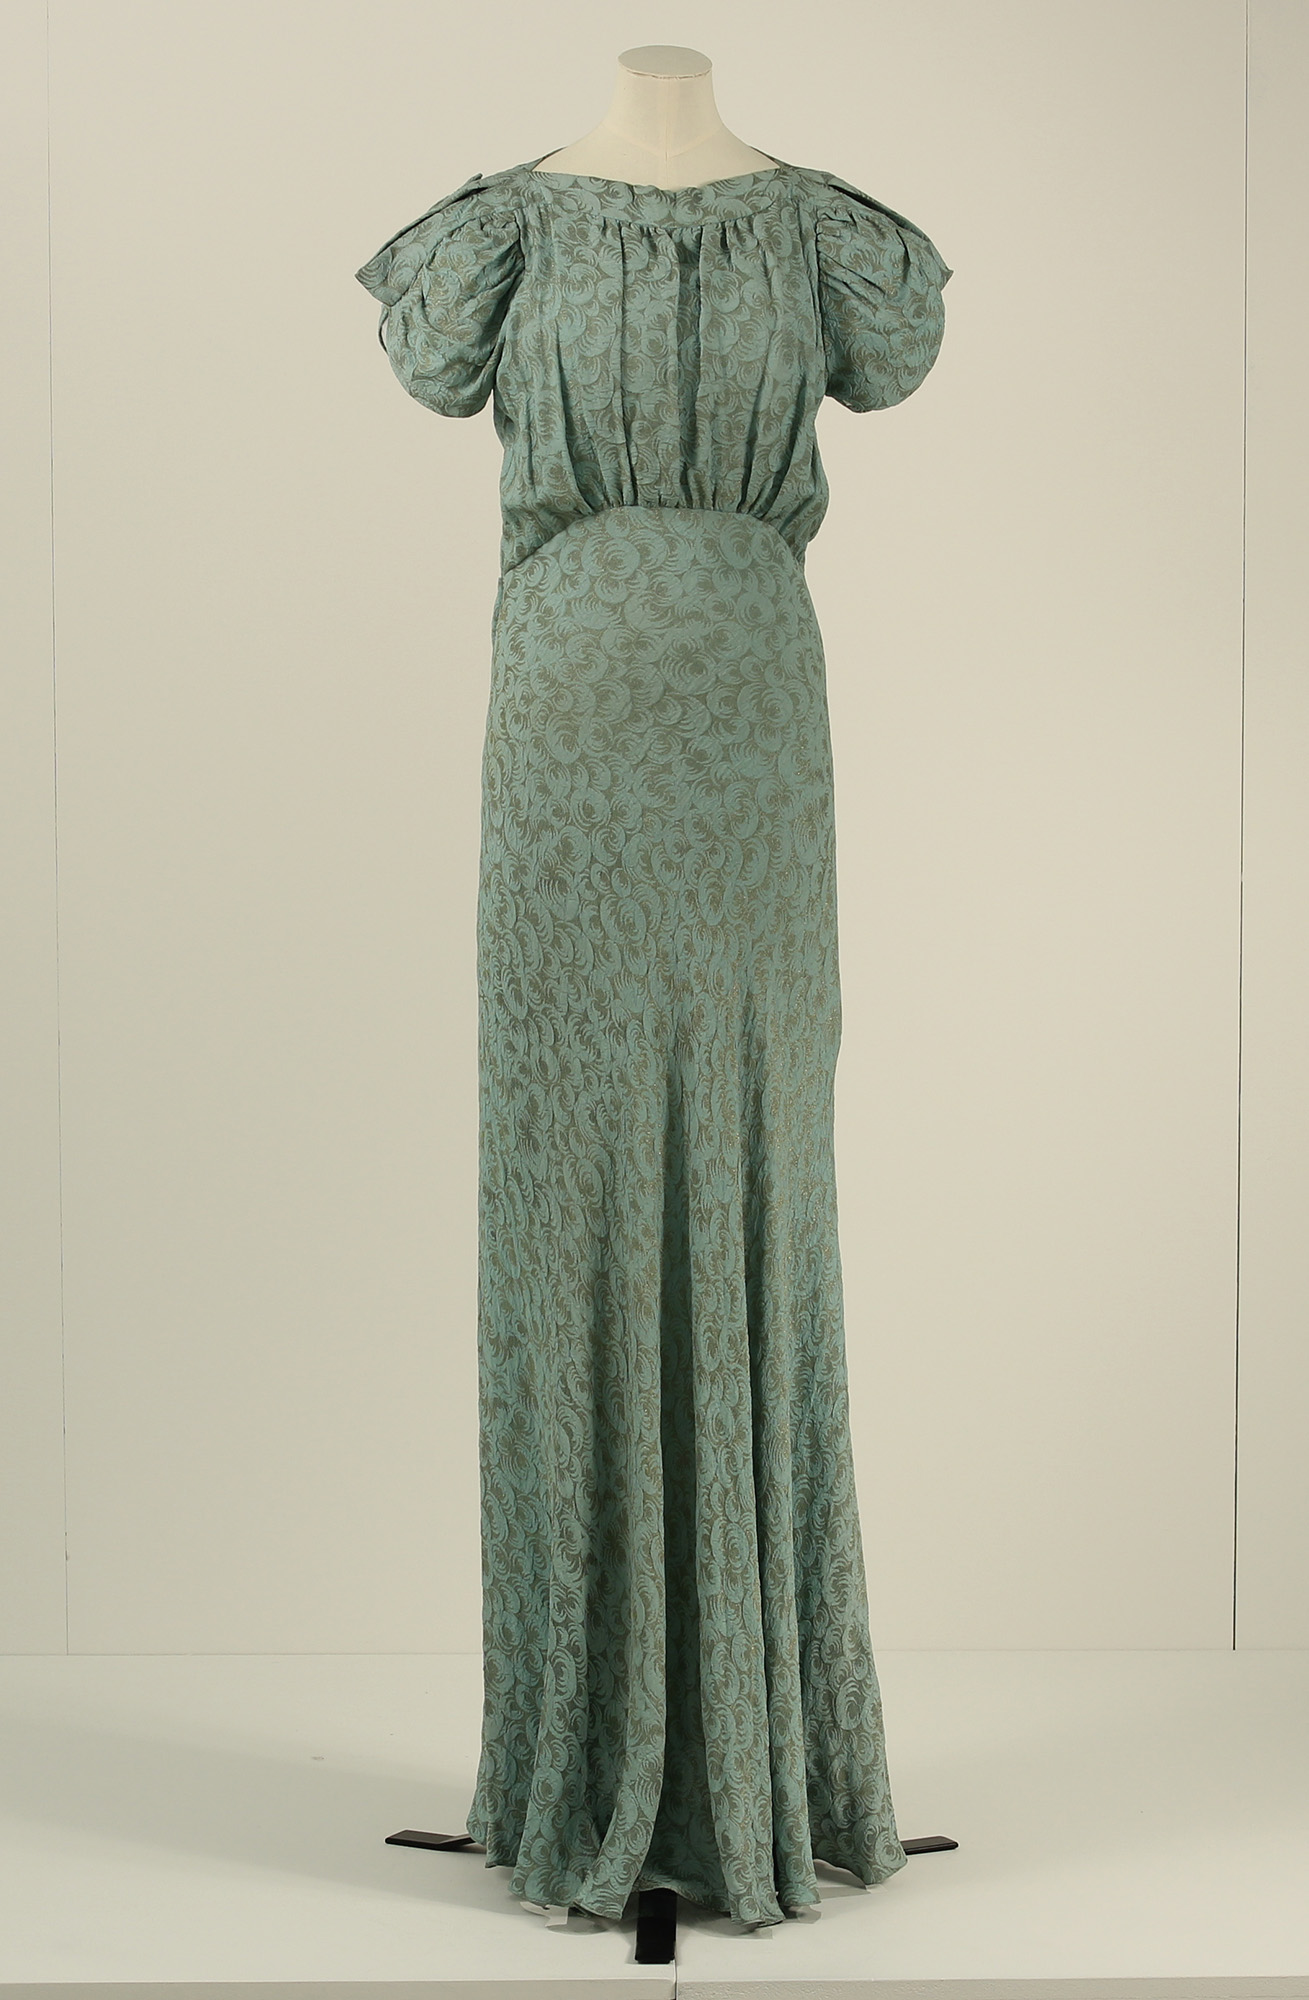 A full length, patterned green dress from the 1930s, with a fitted waist and puffed sleeves